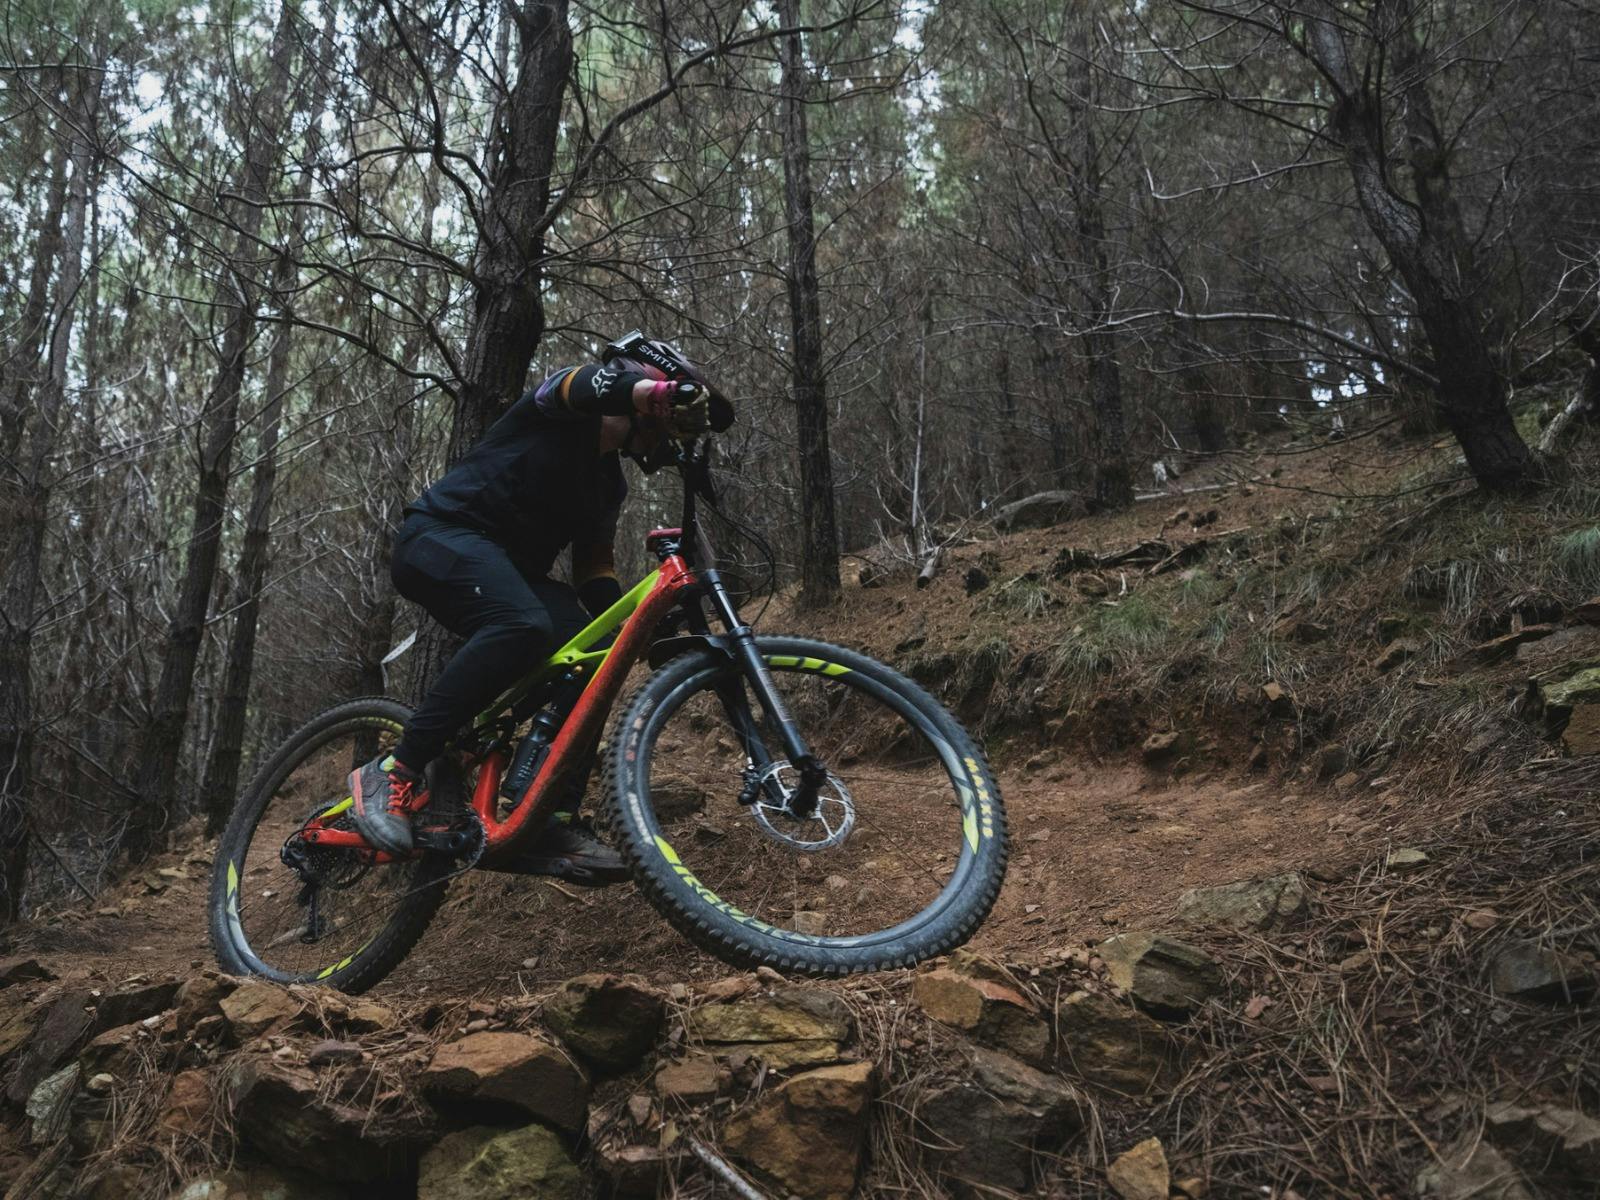 A rider dressed in black rides up a trail in a dark forest.